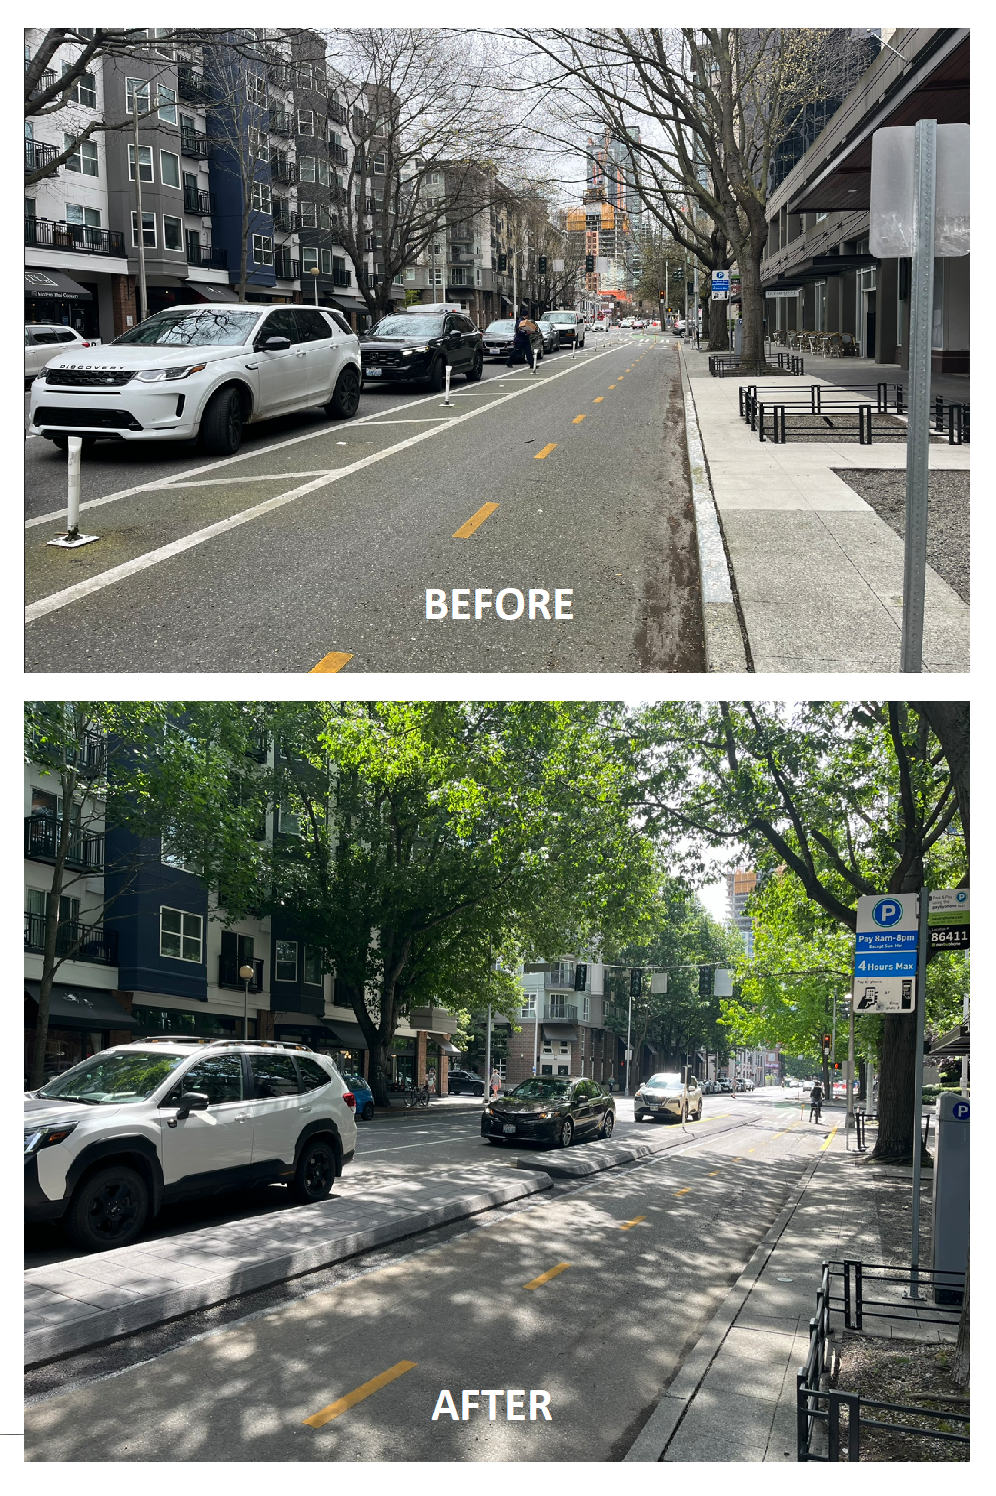 The image is split into two sections. The above section shows the "Before" state, where the bike lane lacks concrete curbs. The below section shows the "After" state, where newly installed concrete curbs clearly separate the road and the bike lane. 